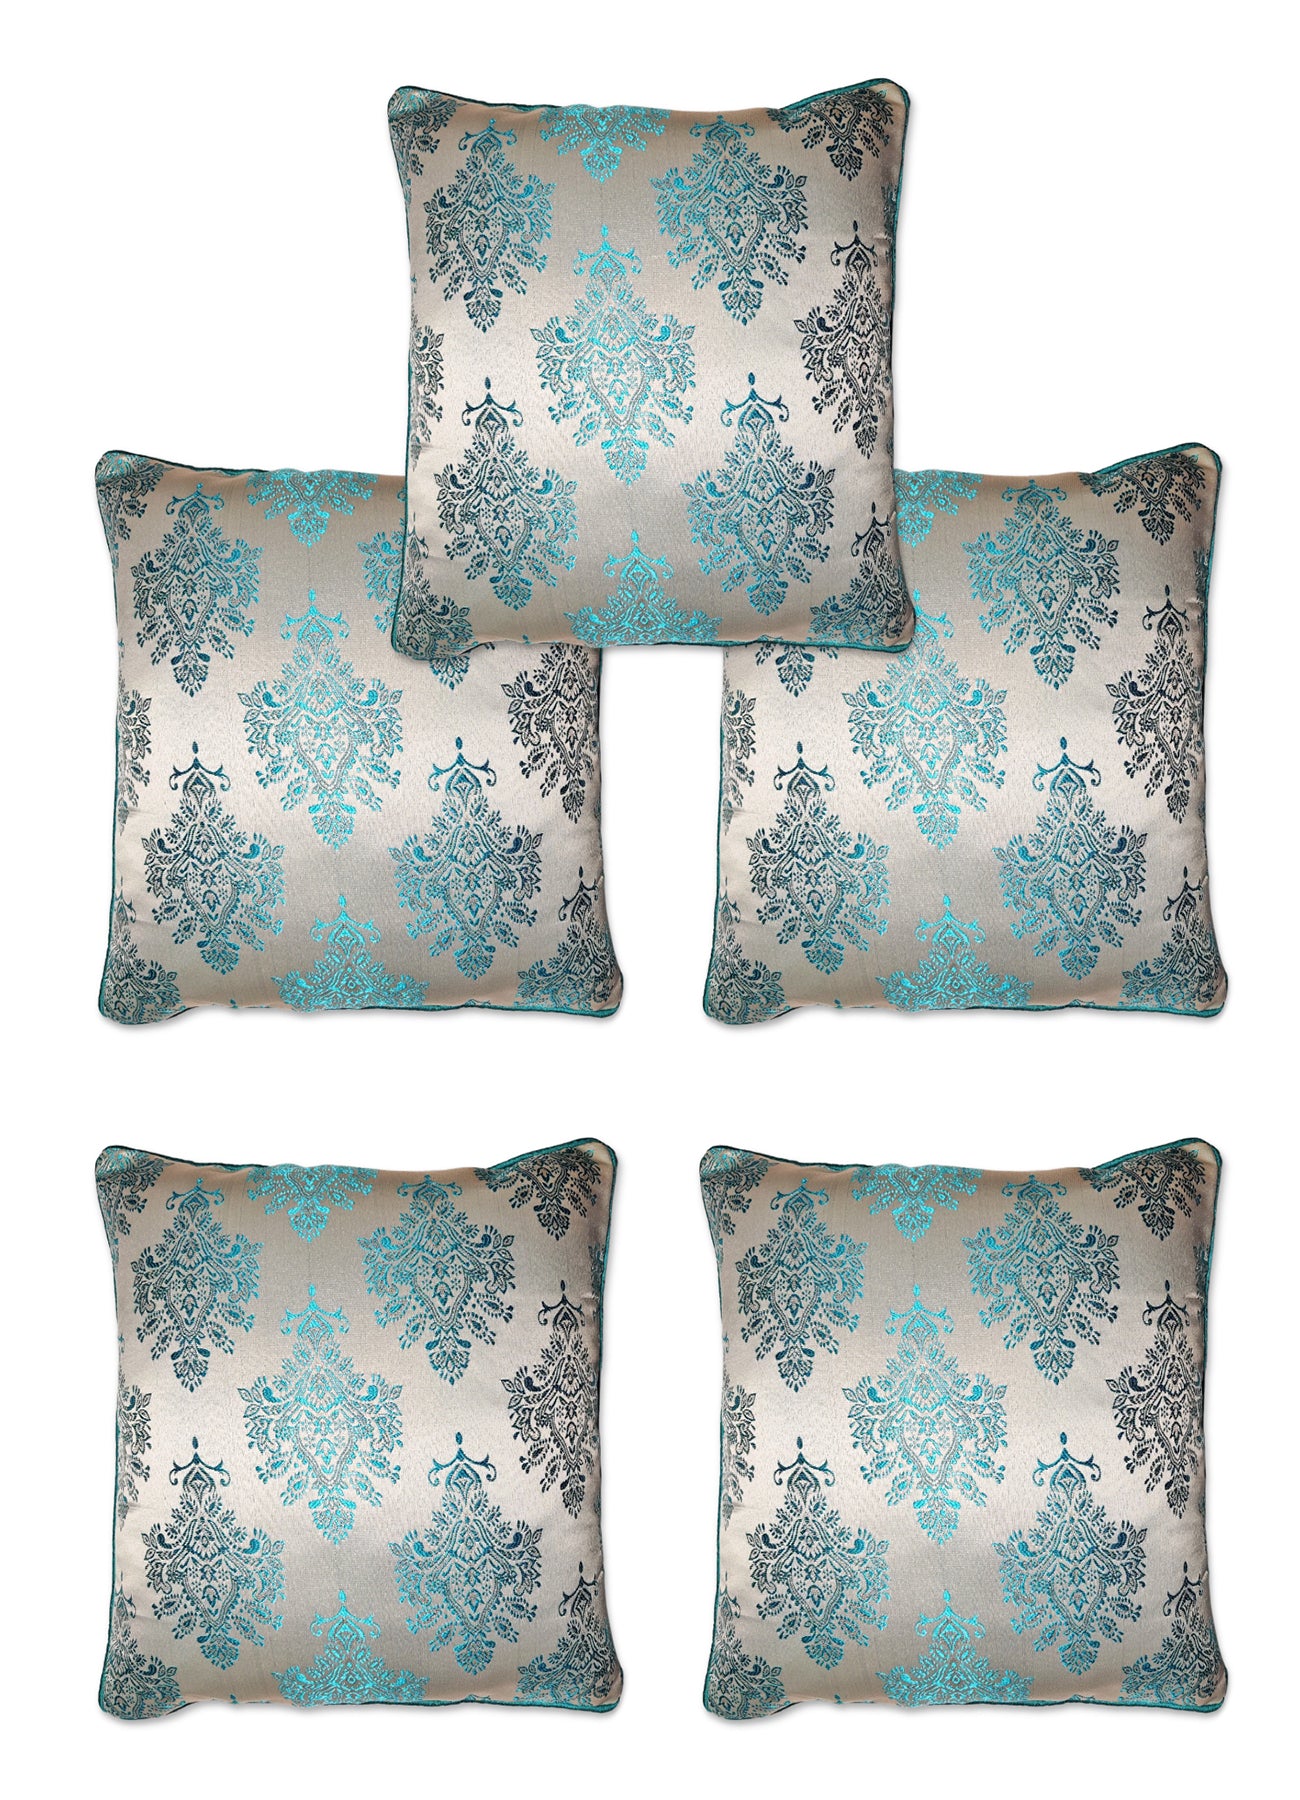 ARTSY® Blue and White Cushion Cover Set - Pack of 5: Refreshing Home Accent for Every Room